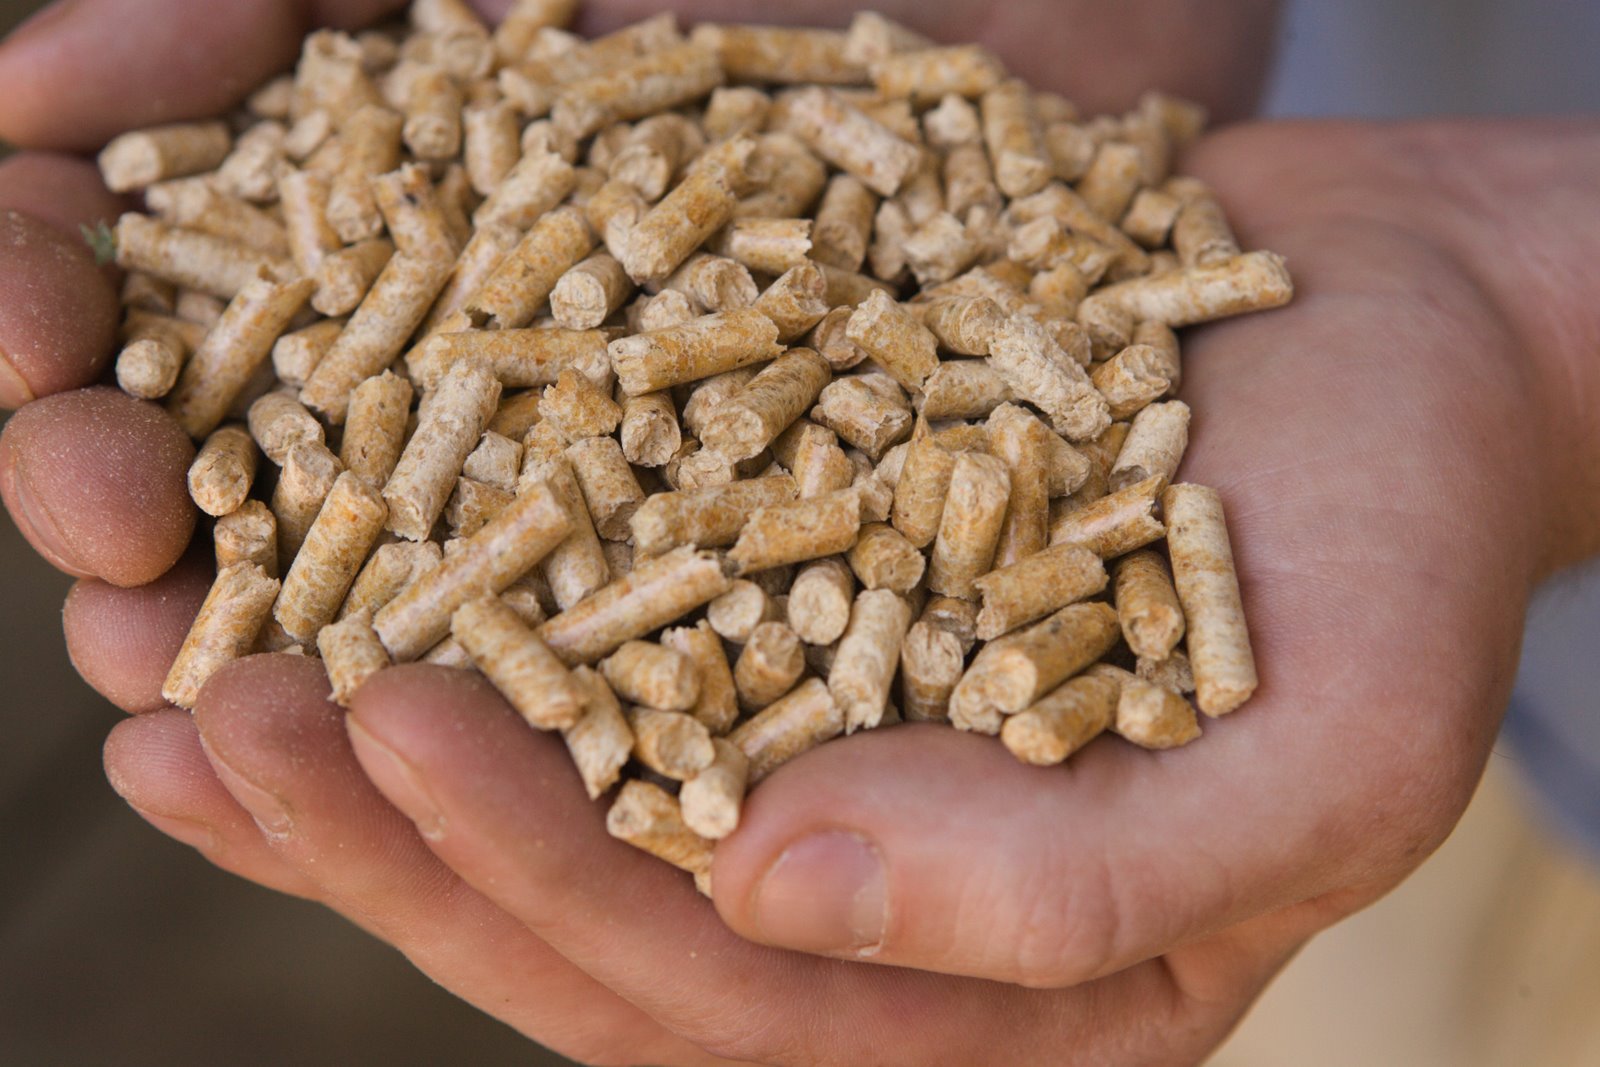 Drax to Convert Fourth Biomass Unit in 2018